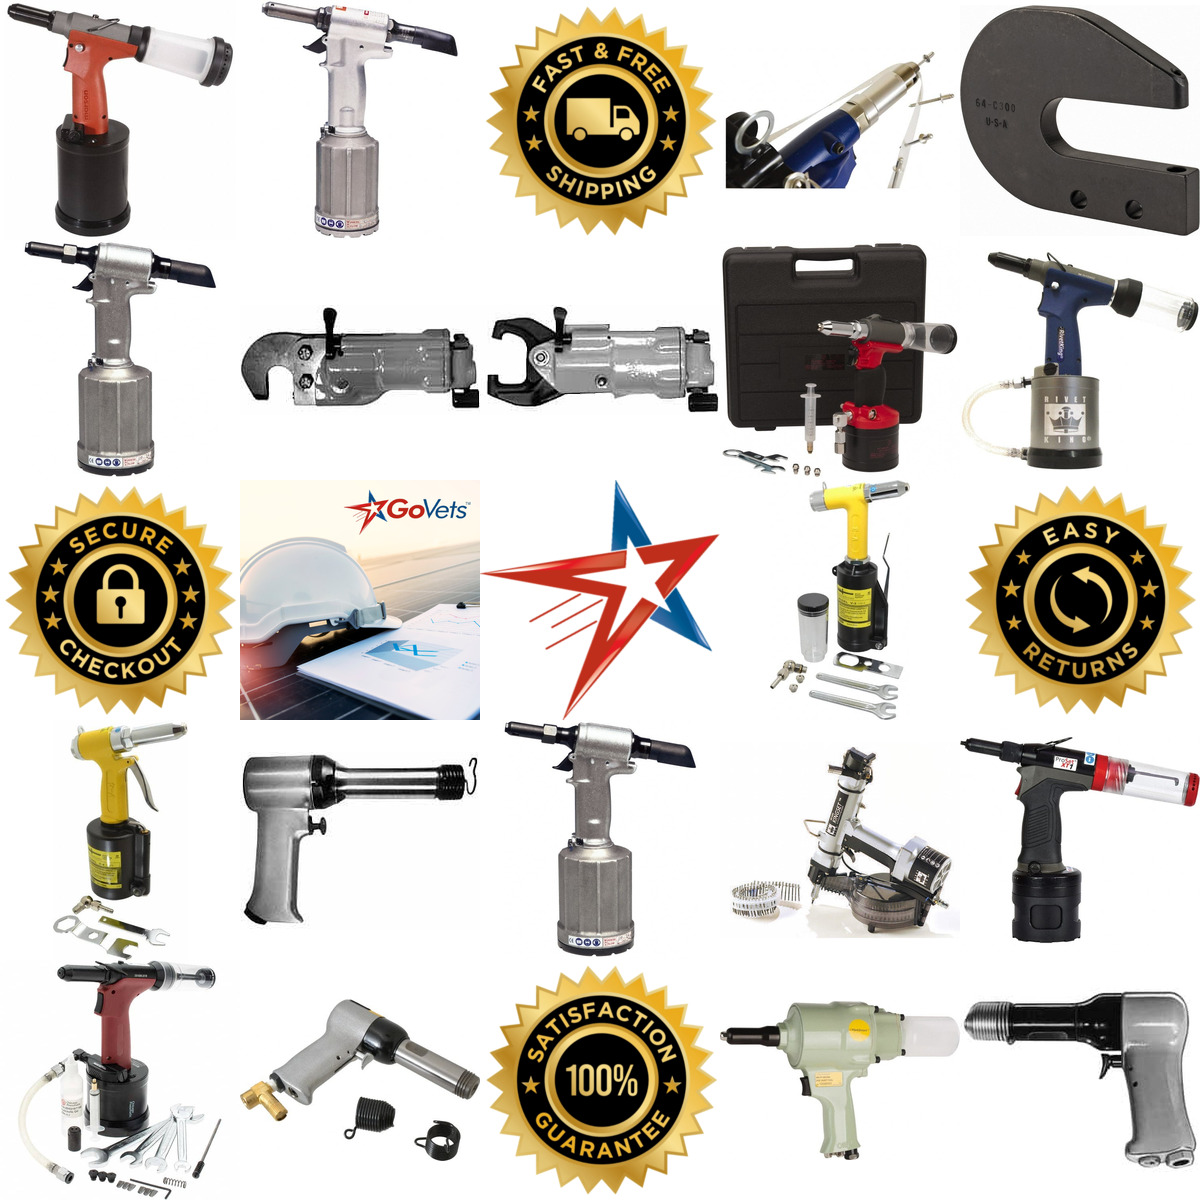 A selection of Power Riveters products on GoVets